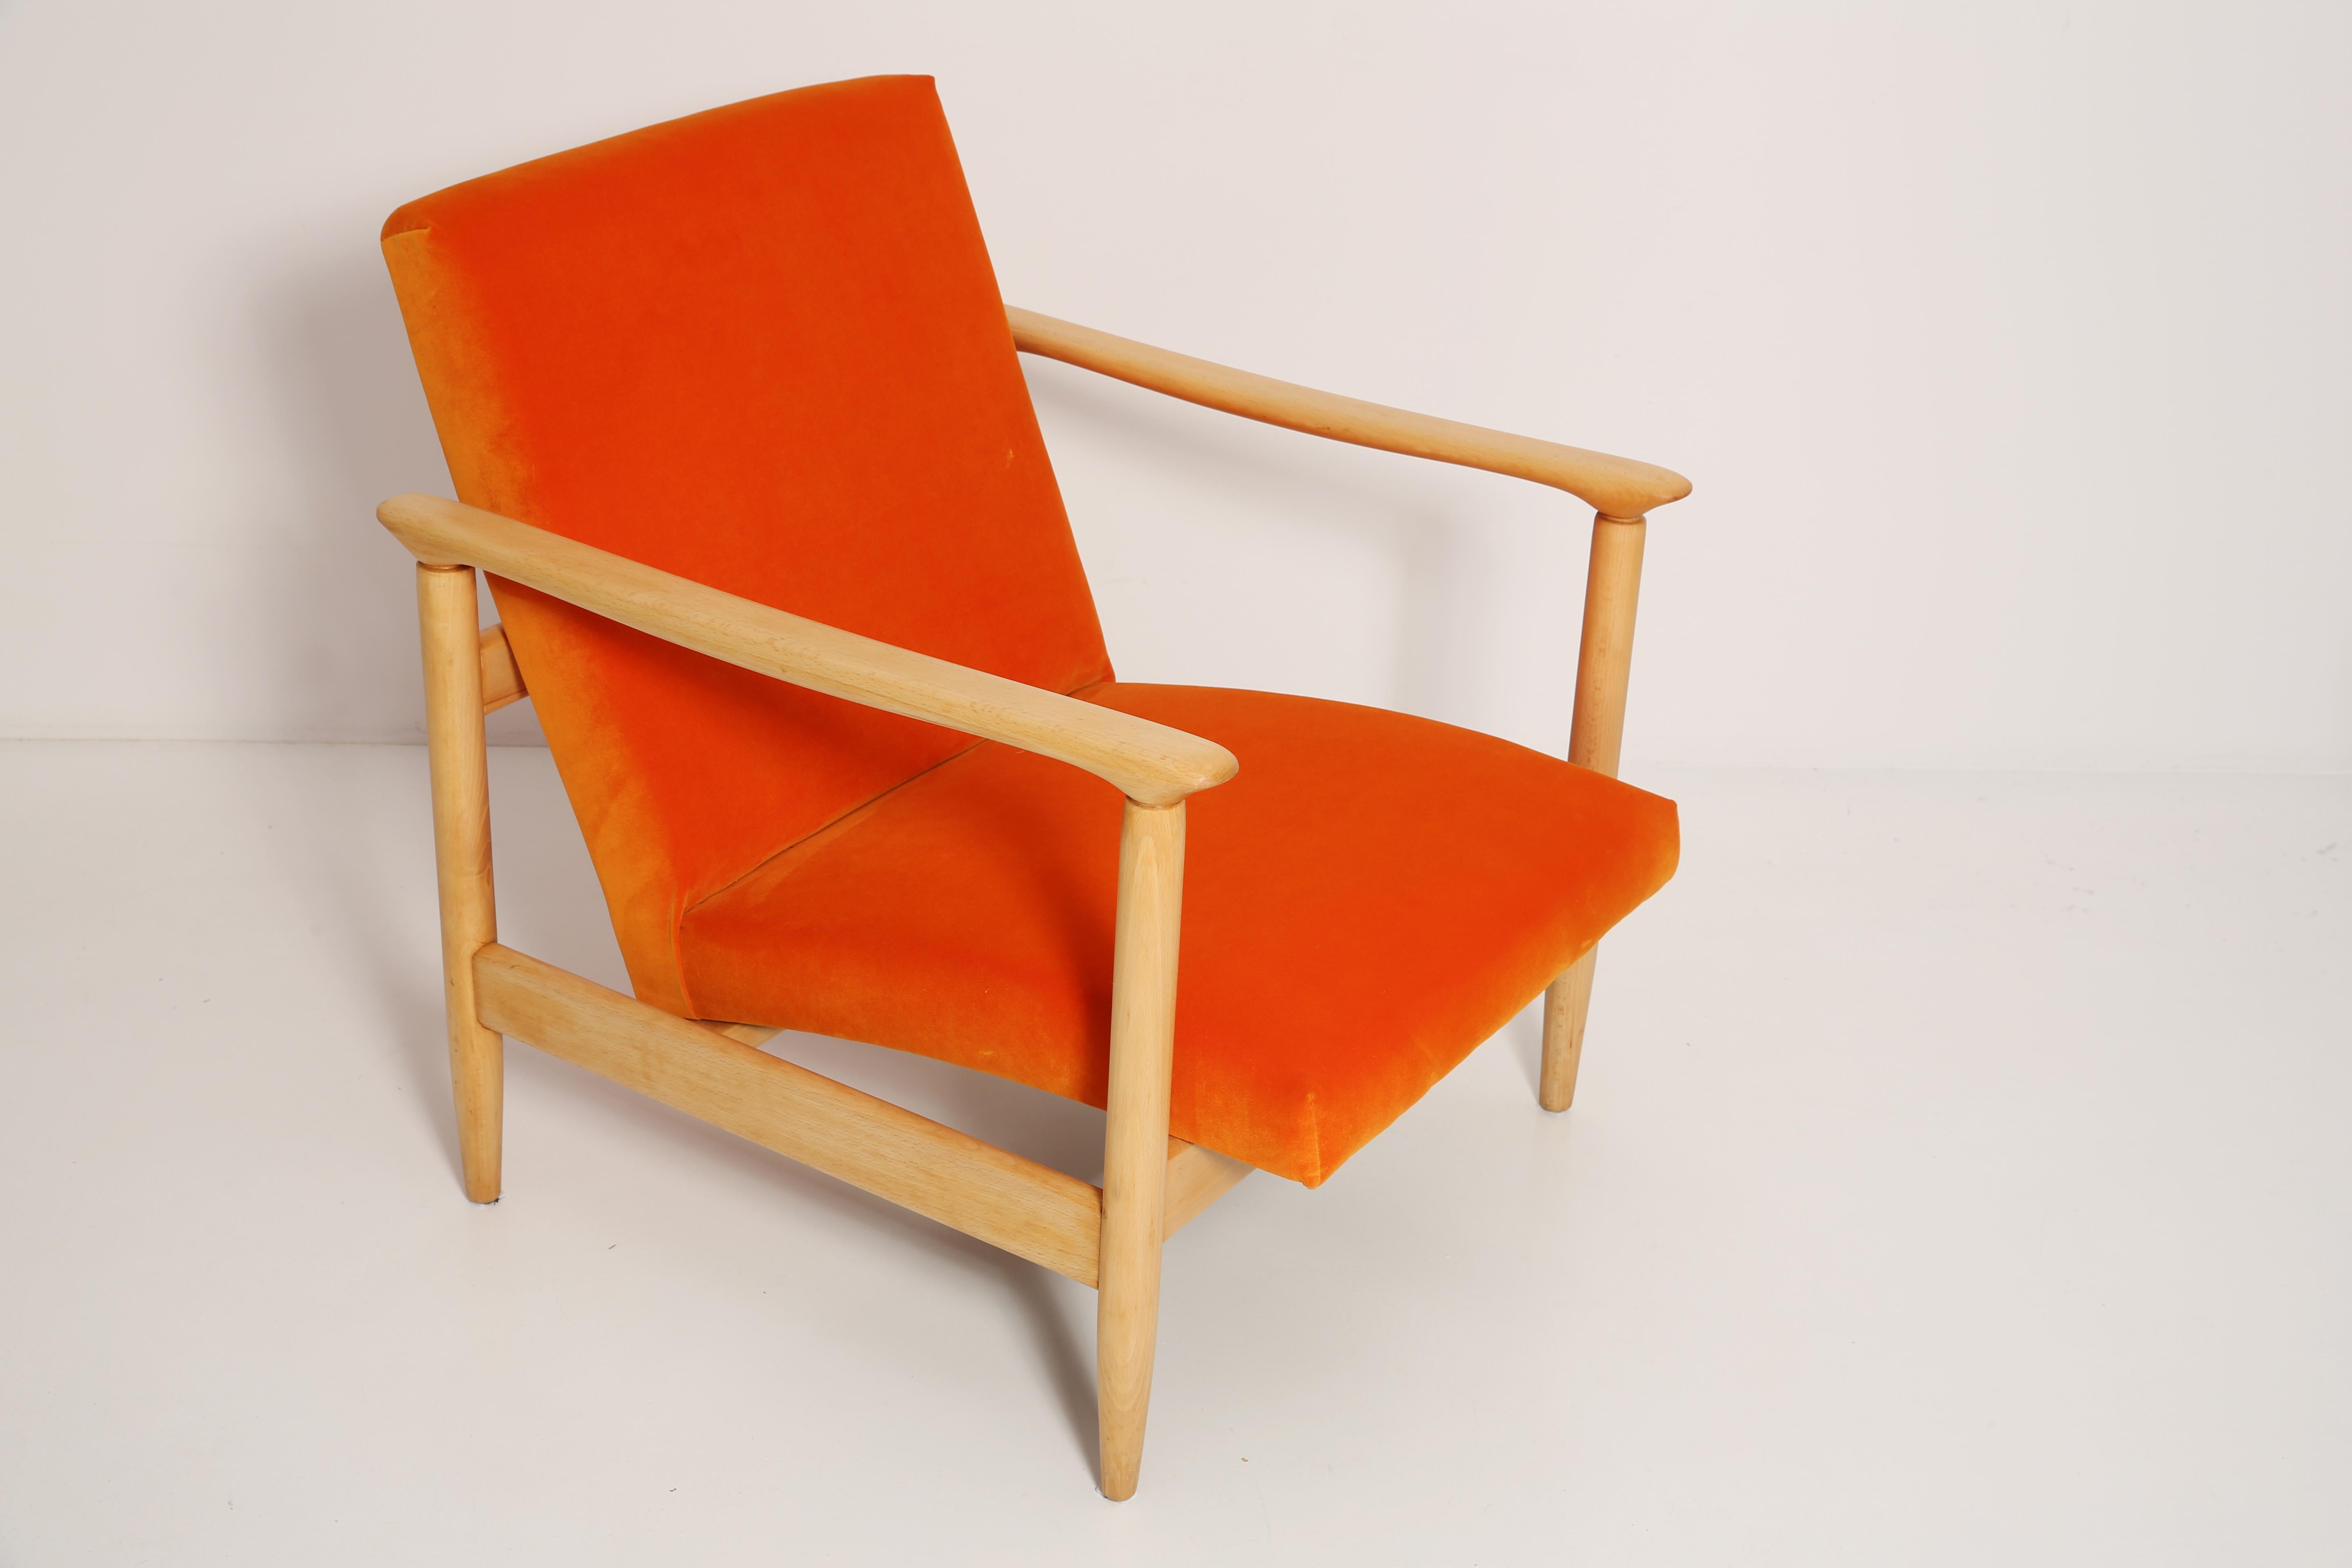 Beautiful bright orange velvet Armchair GFM-142, designed by Edmund Homa, a polish architect, designer of Industrial Design and interior architecture, professor at the Academy of Fine Arts in Gdansk. 

The armchair was made in the 1960s in the